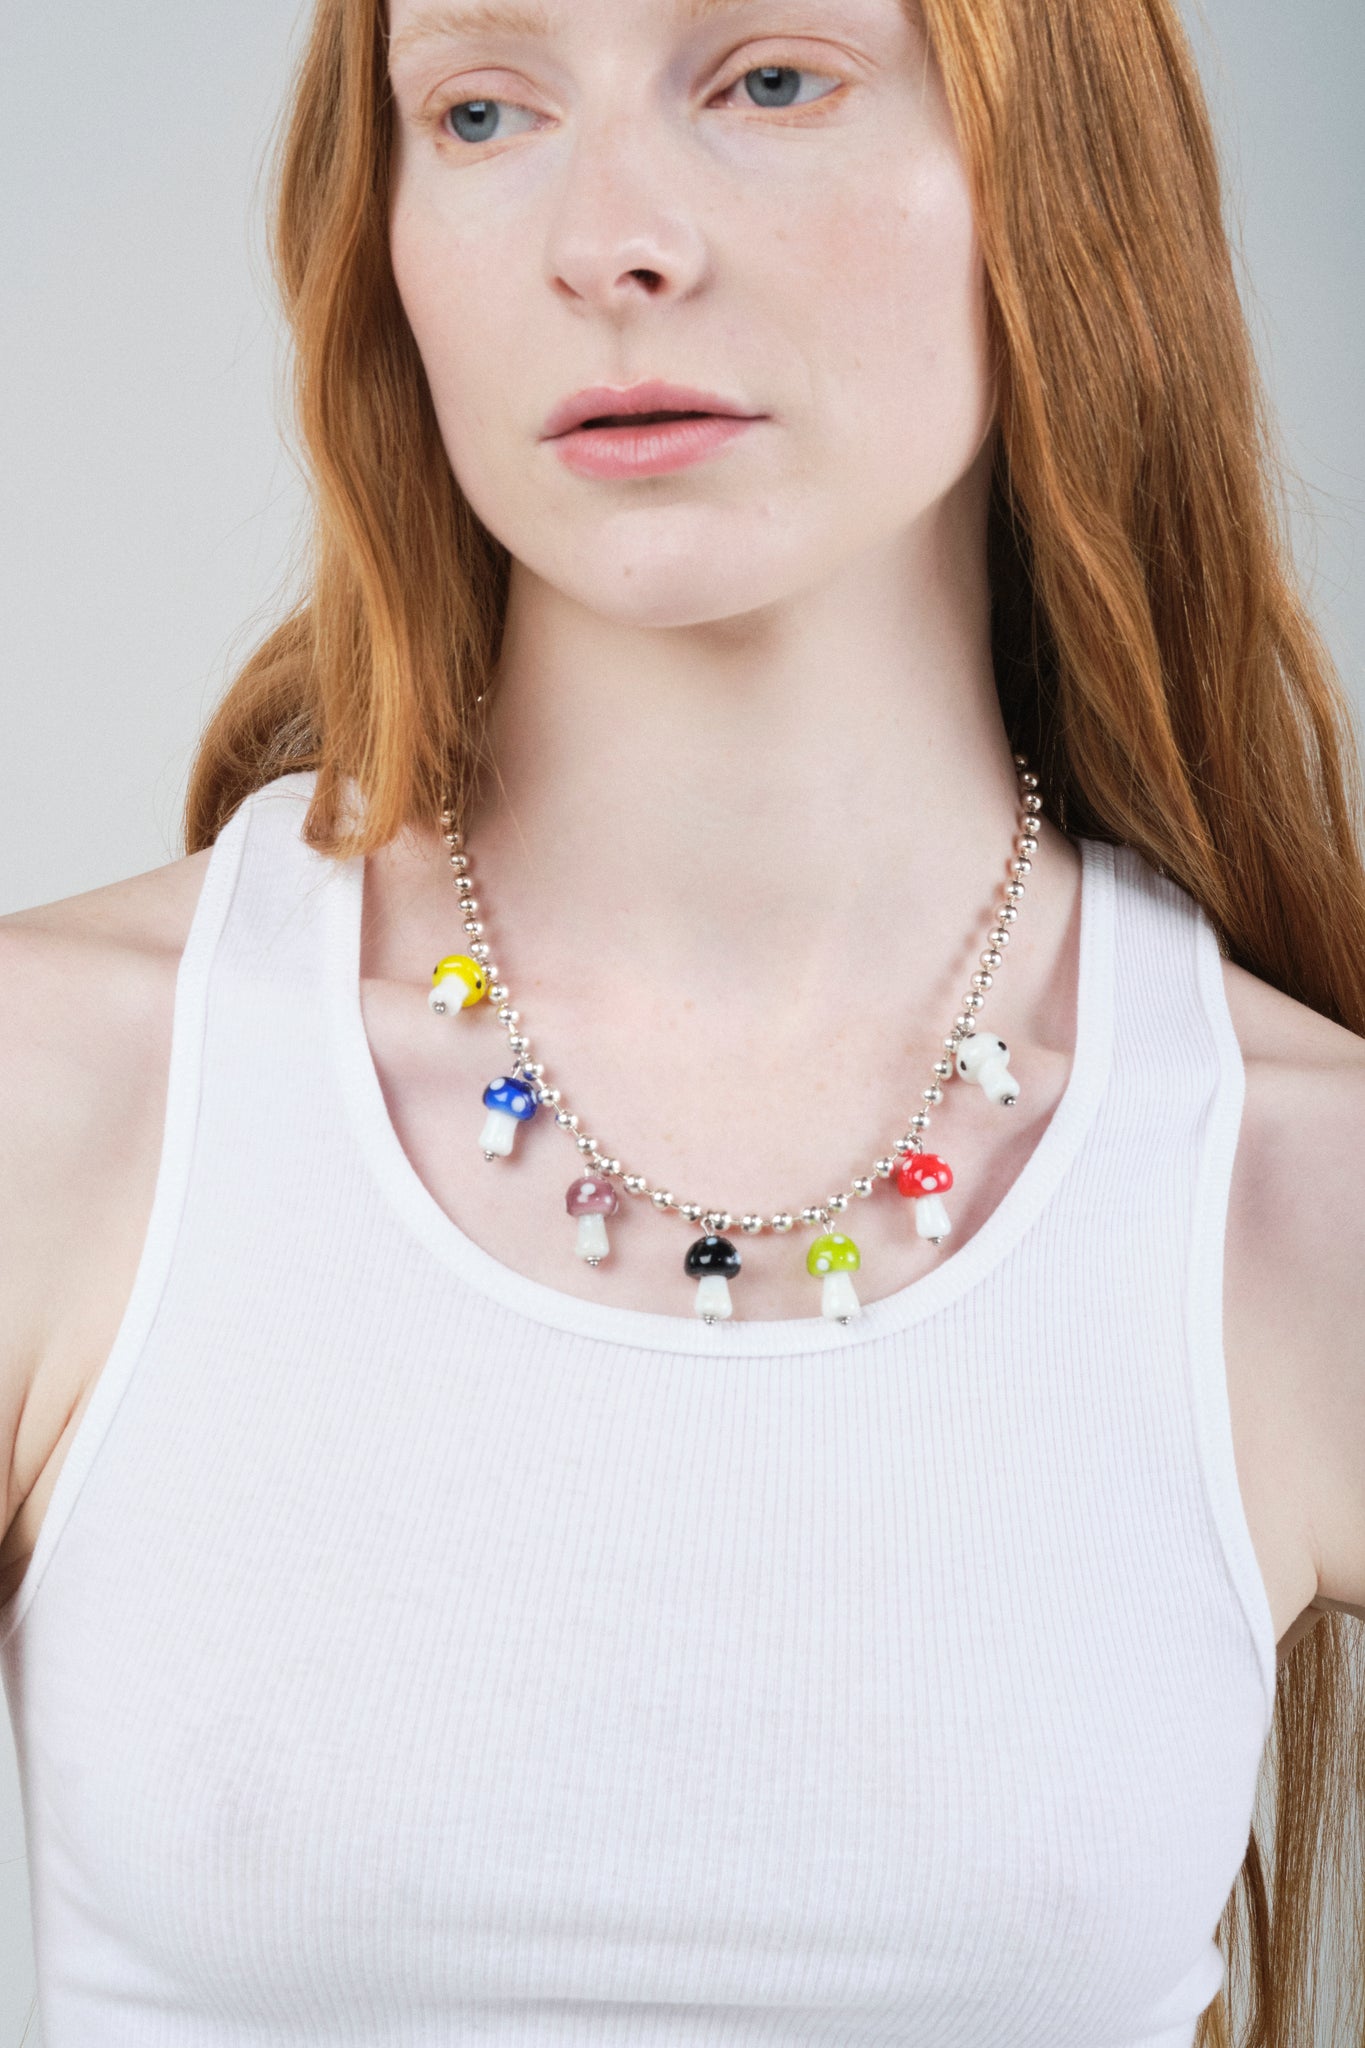 The Mushroom Charm Chain Necklace